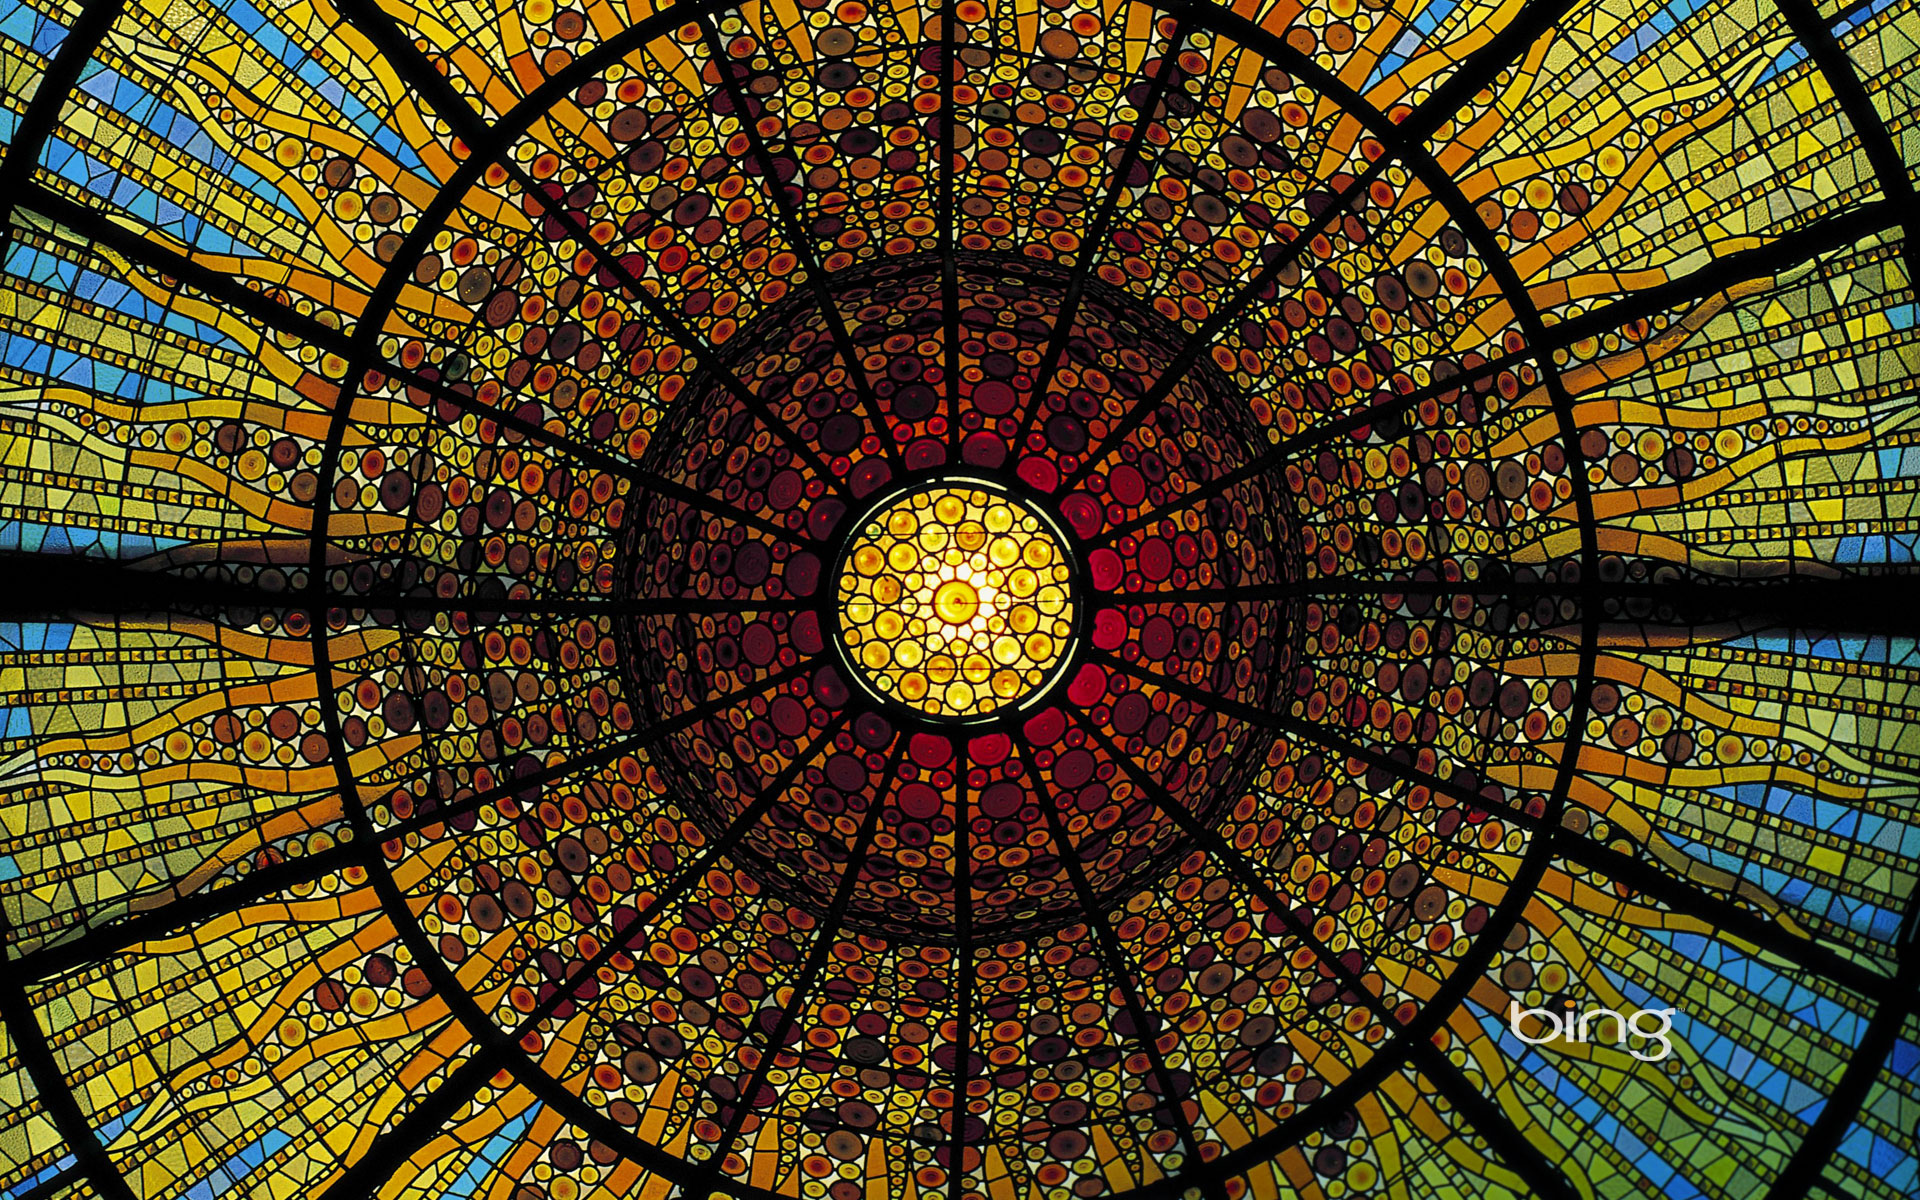 Stained-glass ceiling of the Palau de la Musica Catalana, Barcelona, Spain